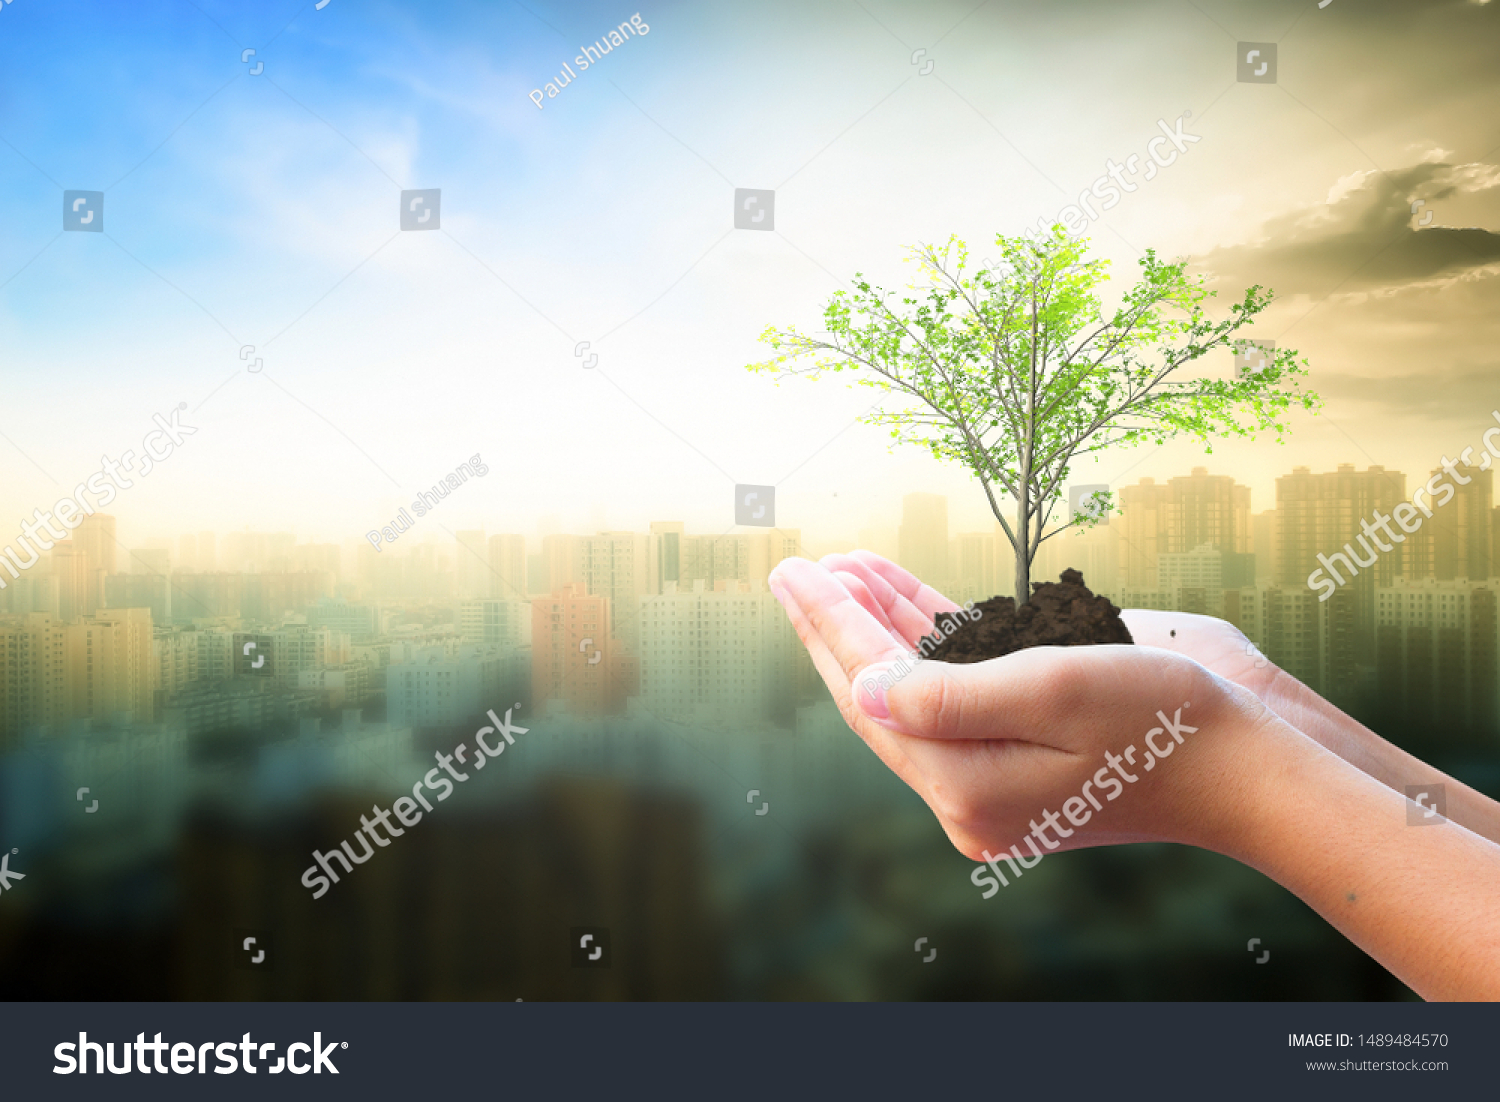 World Habitat Day concept: Human hand holding  tree over city  background #1489484570